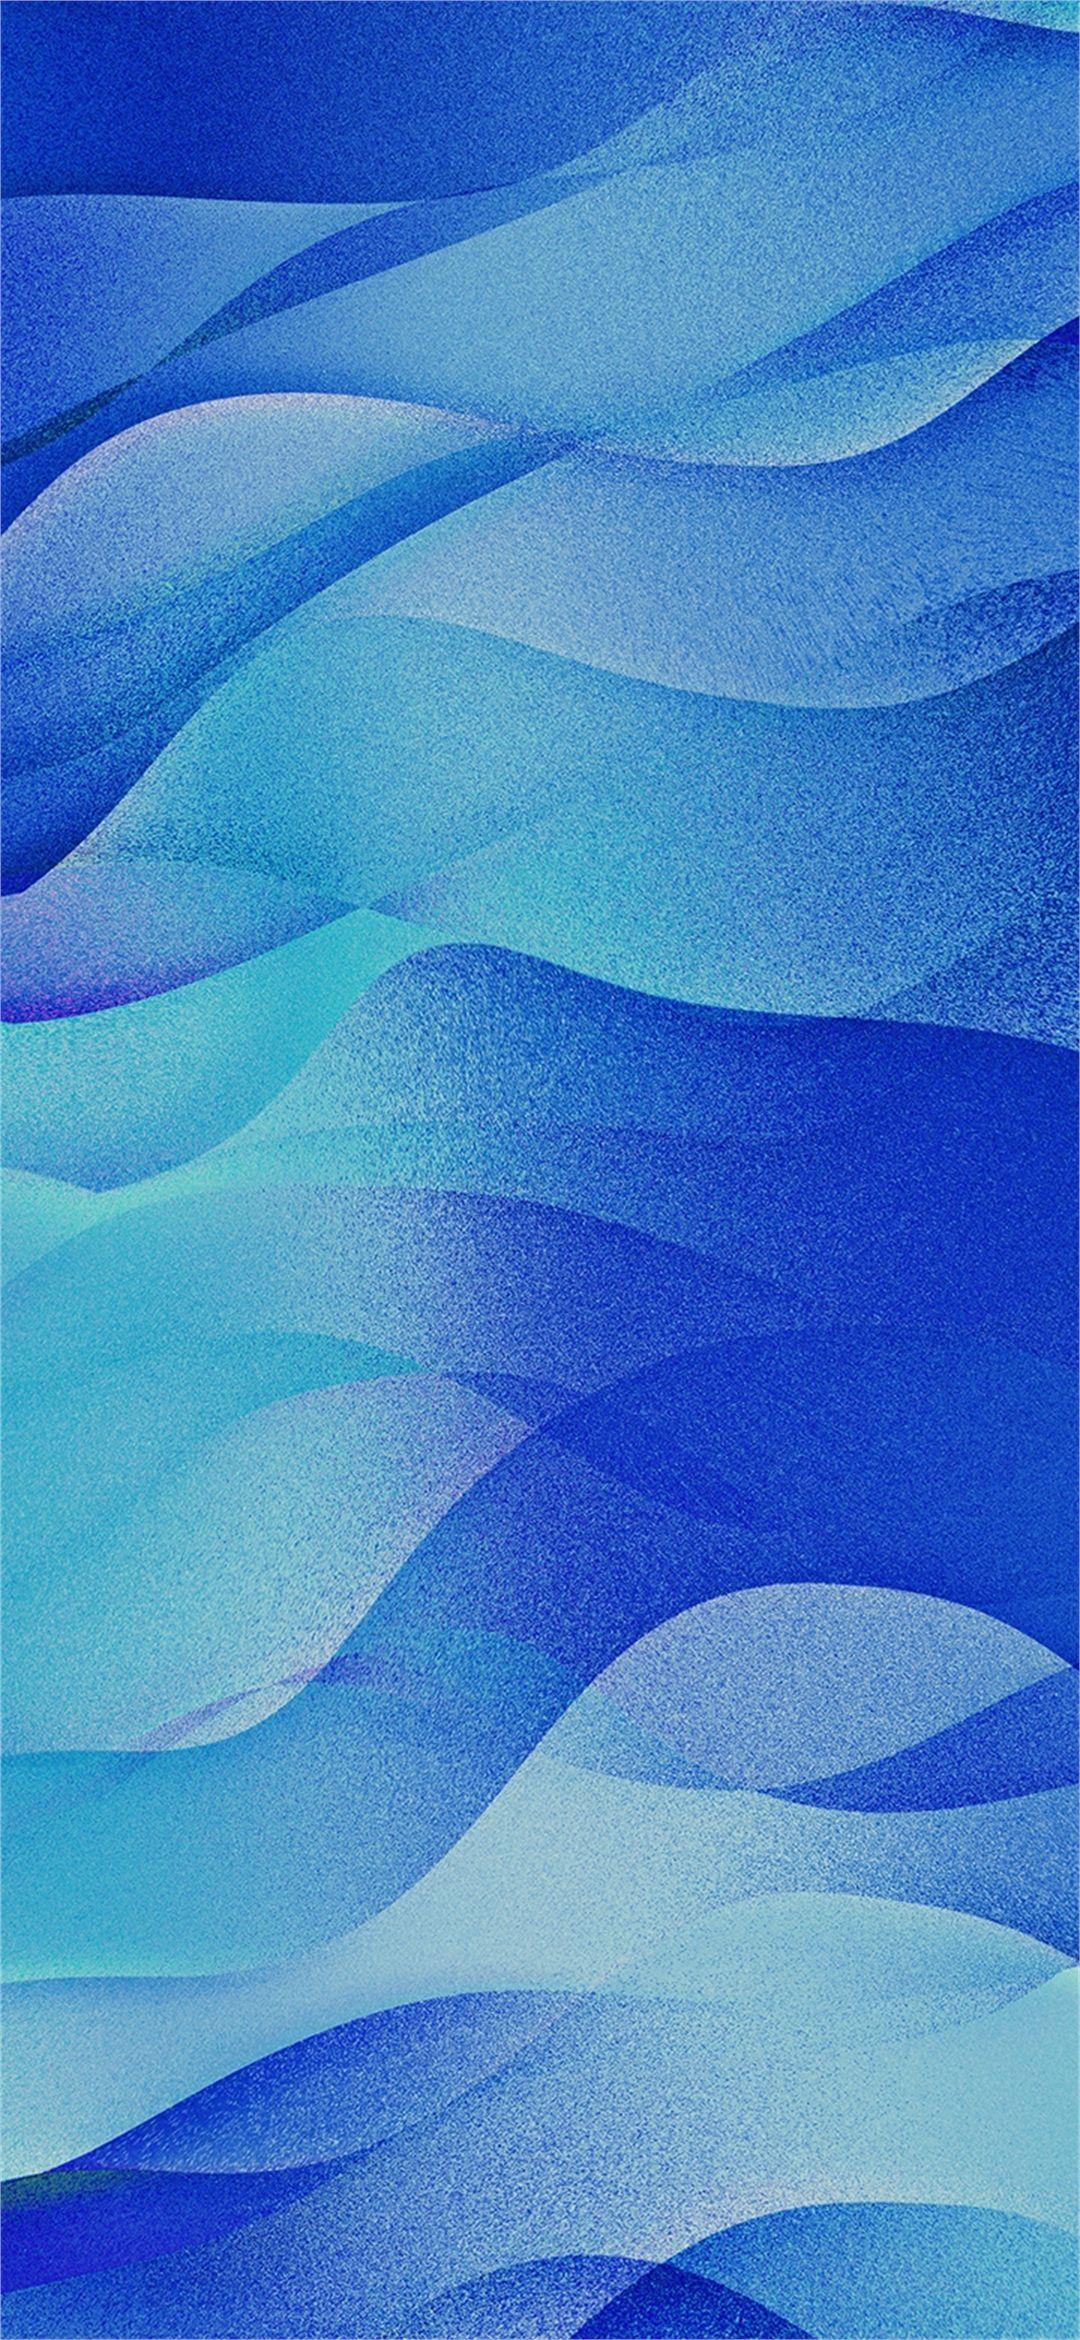 Download the Oppo F11 Pro Wallpapers. Galaxy Blue abstract Wallpapers